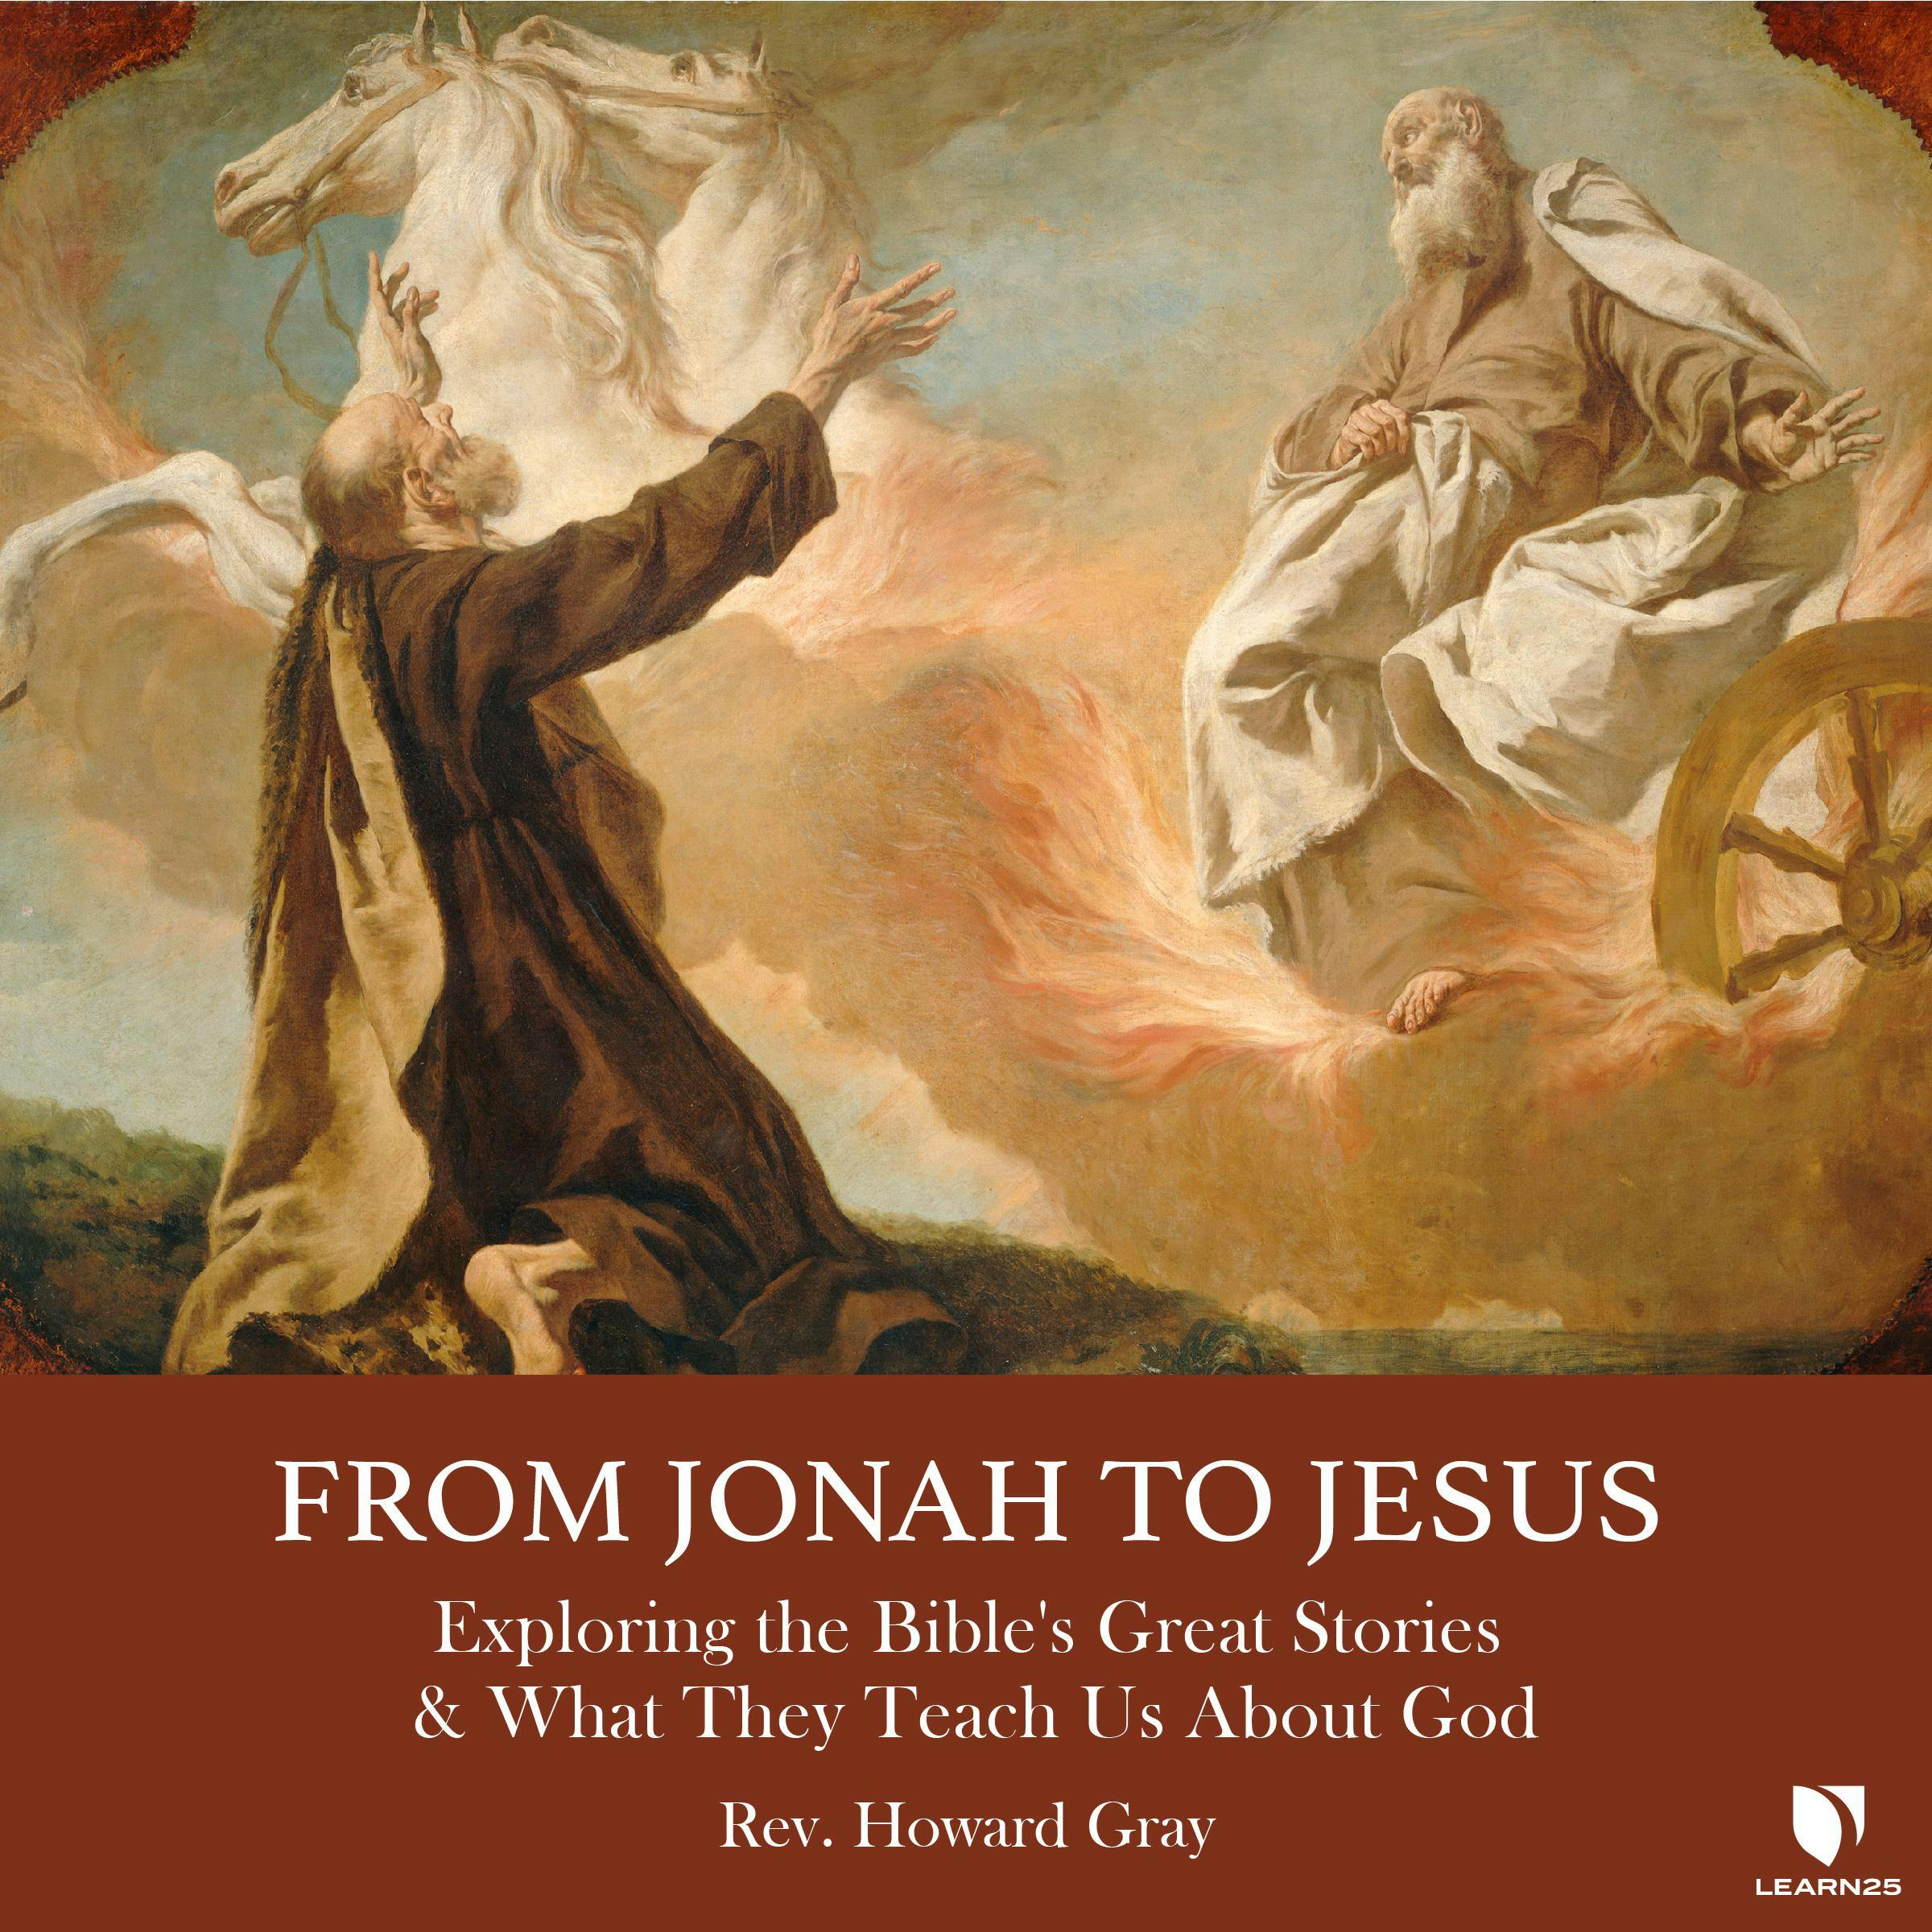 From Jonah to Jesus: Exploring the Bible's Great Stories & What They Teach Us About God - undefined